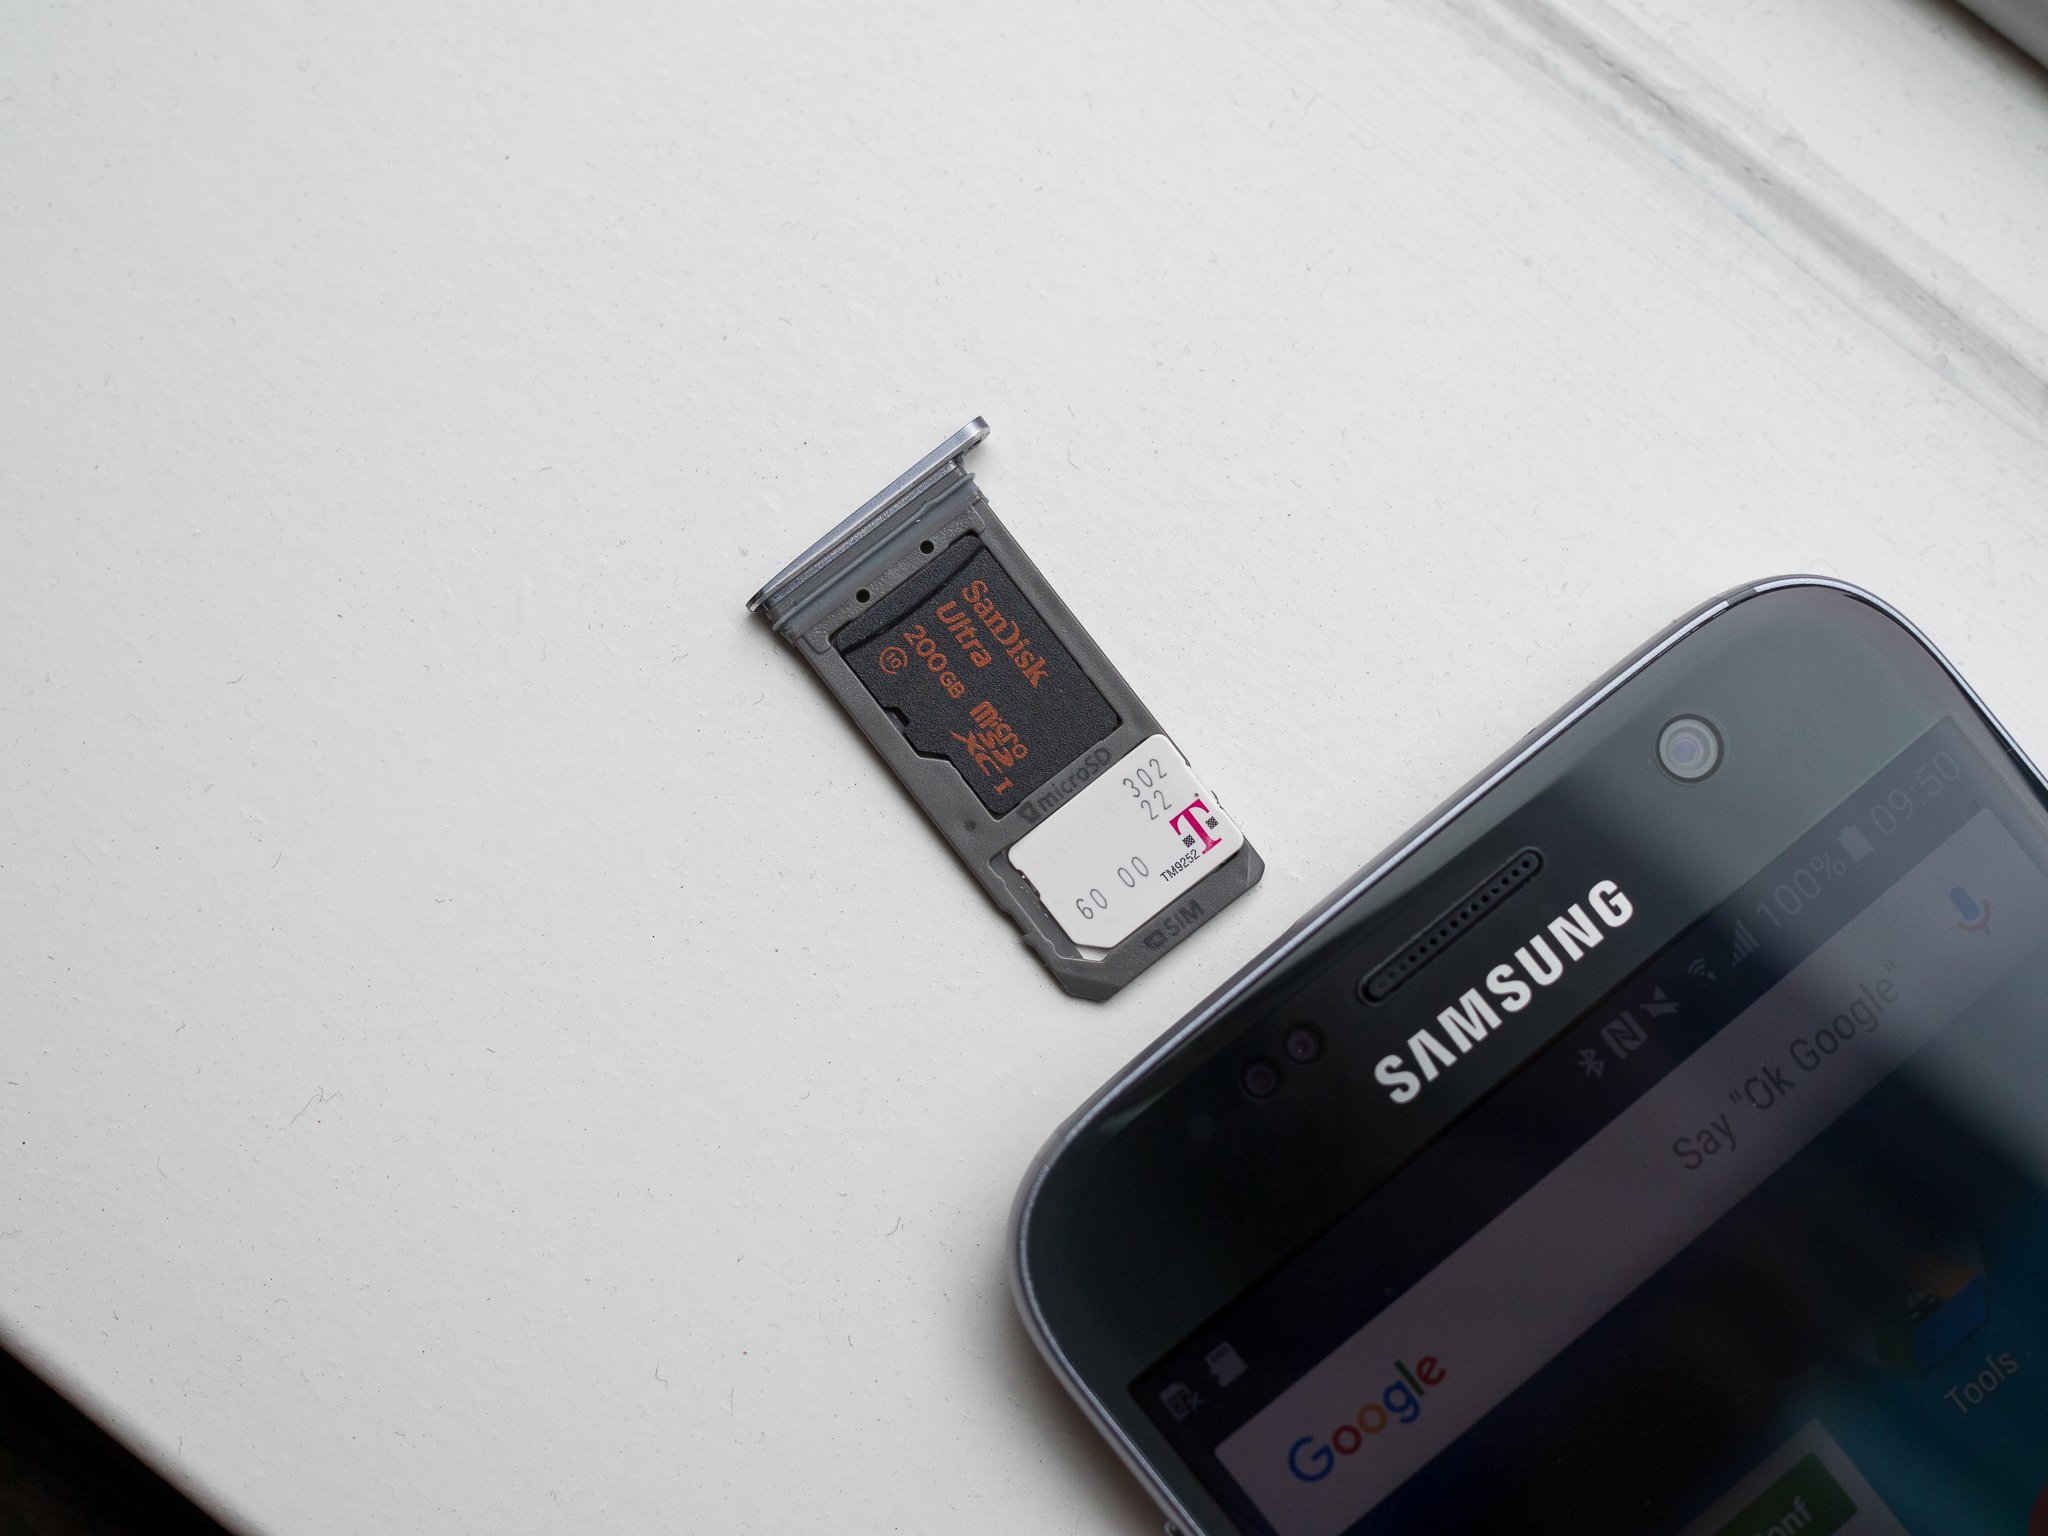 How many photos can a 2 gigabyte memory card hold?